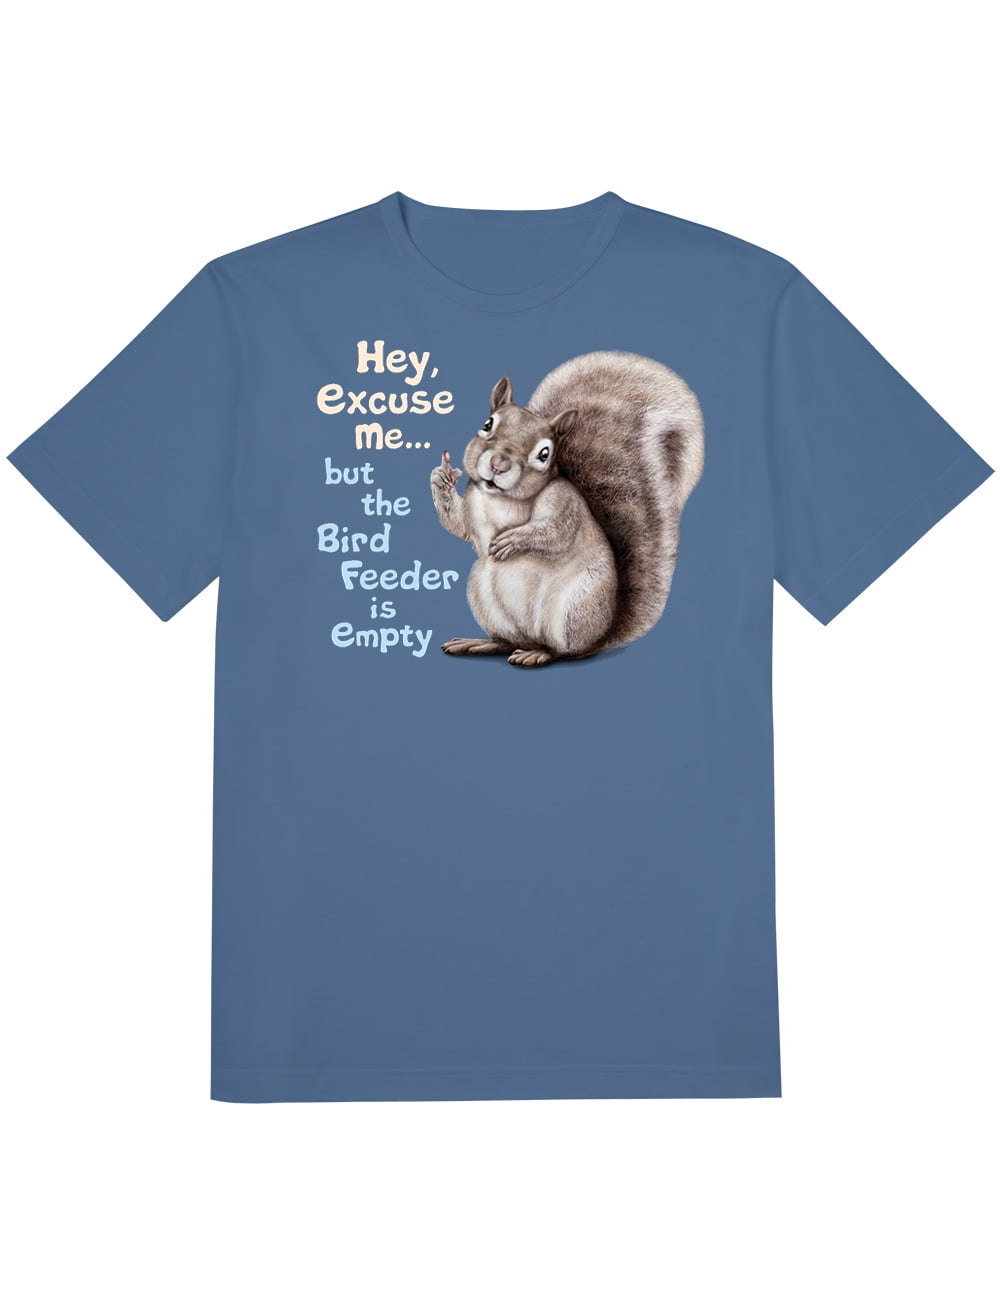 red squirrel t shirt